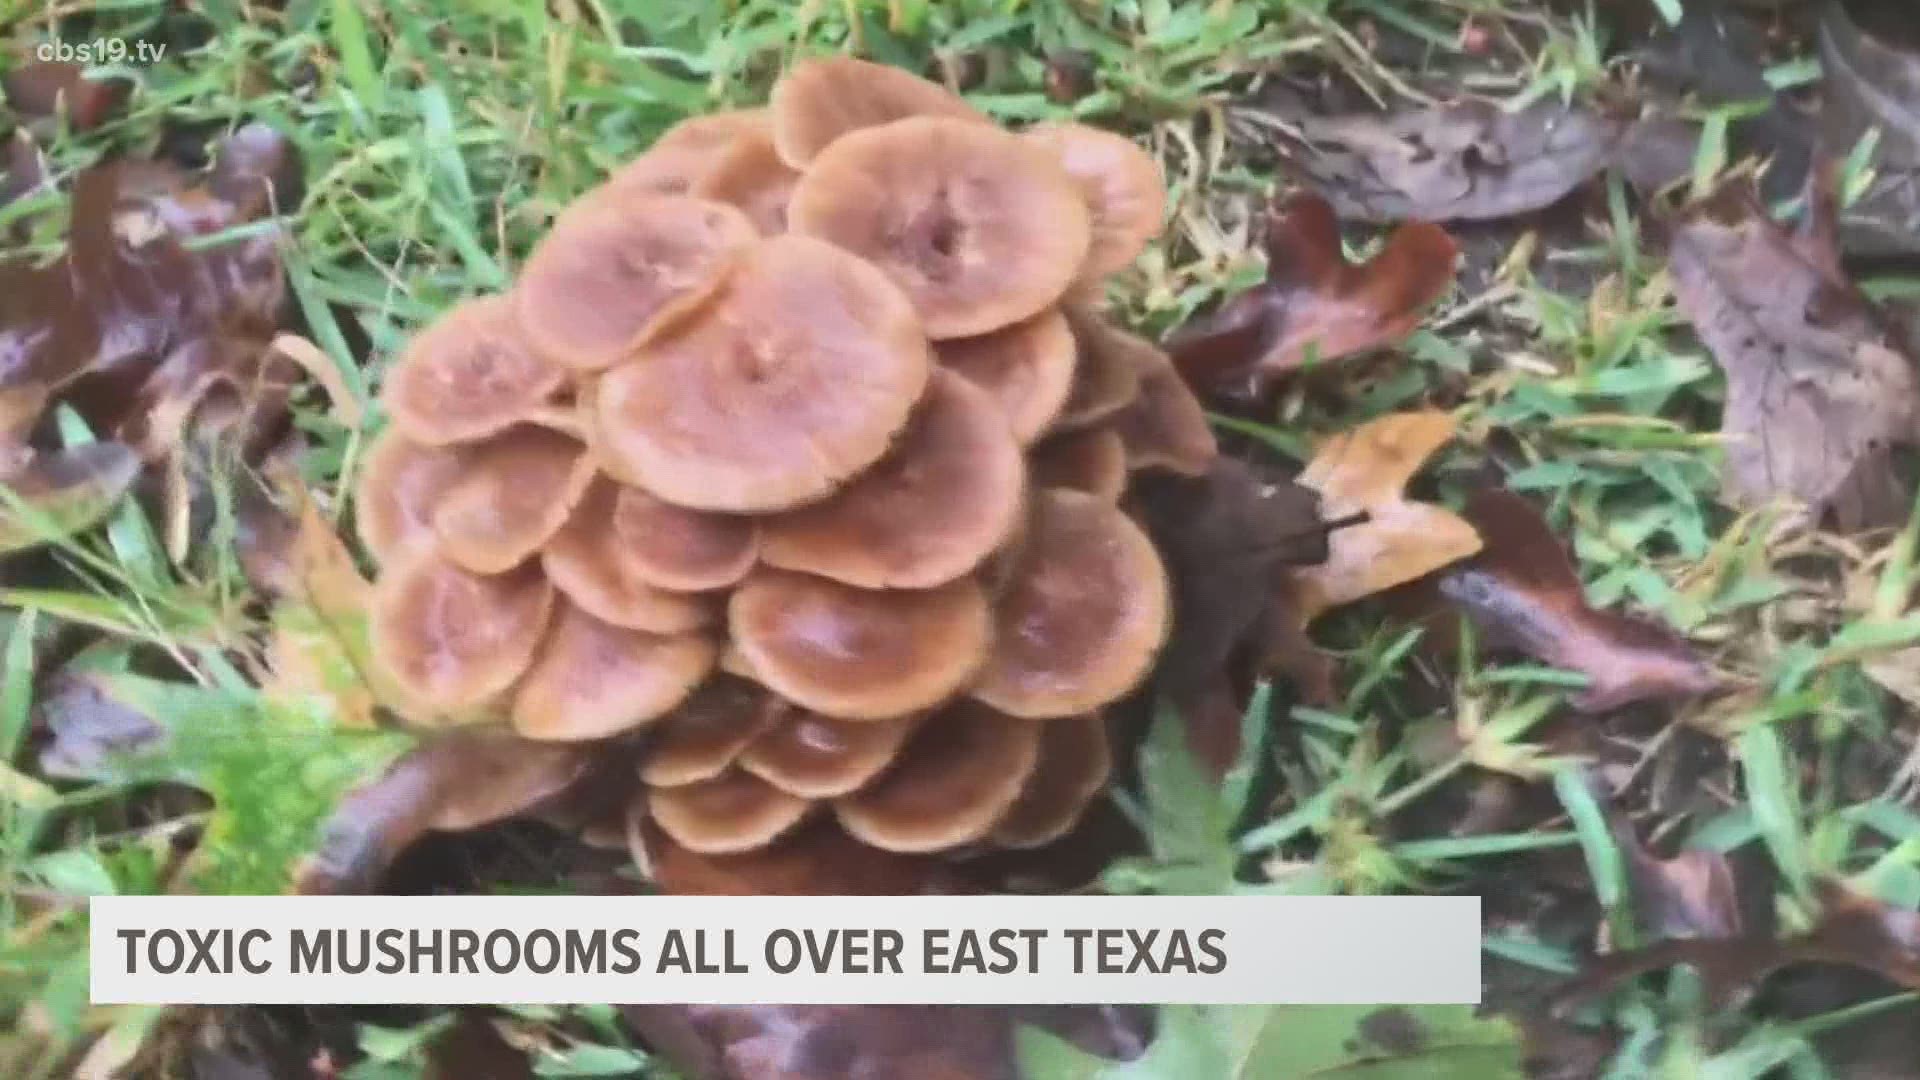 A week full of rain has brought some dangerous fungi to East Texas.